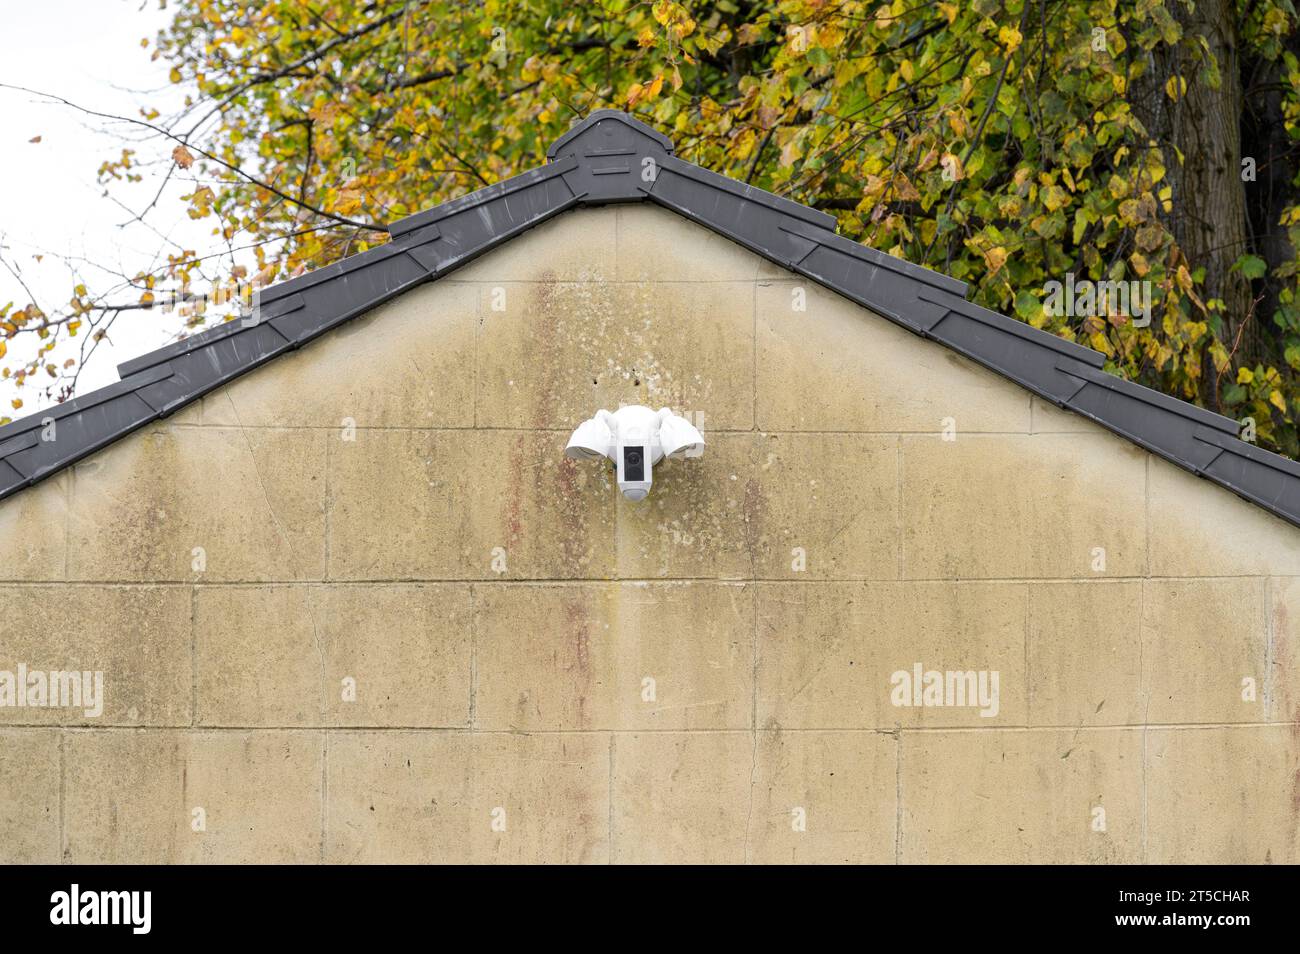 Ring floodlight and security camera on a garage wall to deter crime, Scotland, UK. Europe Stock Photo